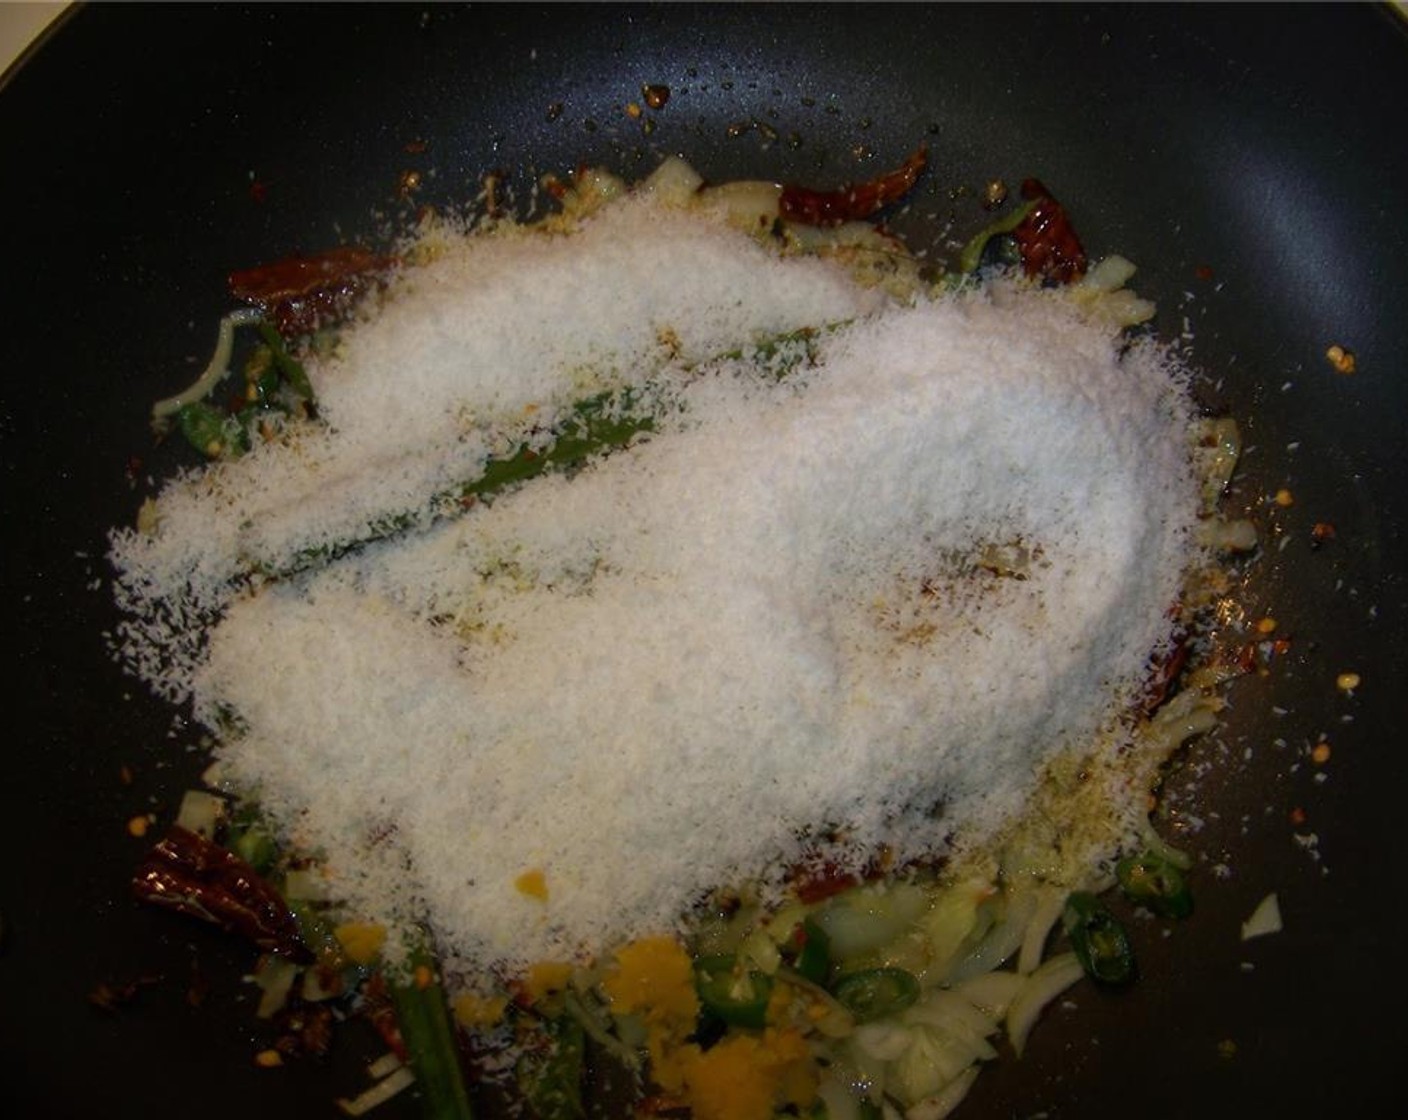 step 3 In a pan, heat canola oil. Add the remaining Onion (1/2), Curry Leaves (10), Pandan Leaves (1), Dried Chili Peppers (3), Mustard Seeds (1 Tbsp), and Green Chili Peppers (2). Once the onion begin to soften, add the Desiccated Coconut (1 cup), Salt (to taste) and Red Chili Powder (1 tsp).